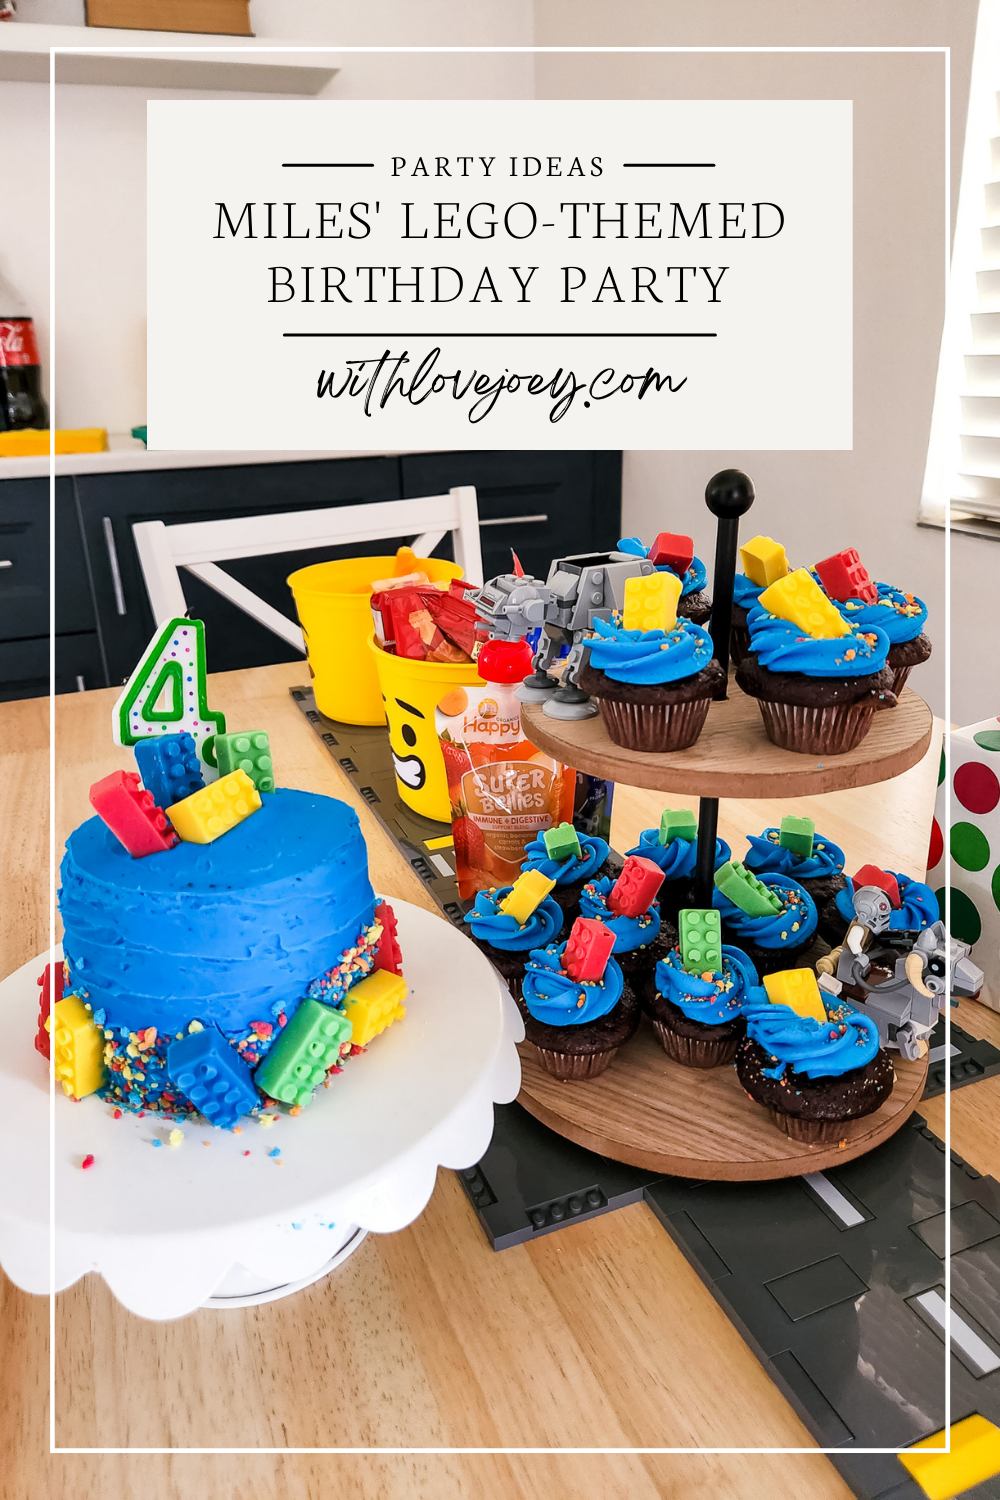 LEGO-themed birthday party at withlovejoey.com